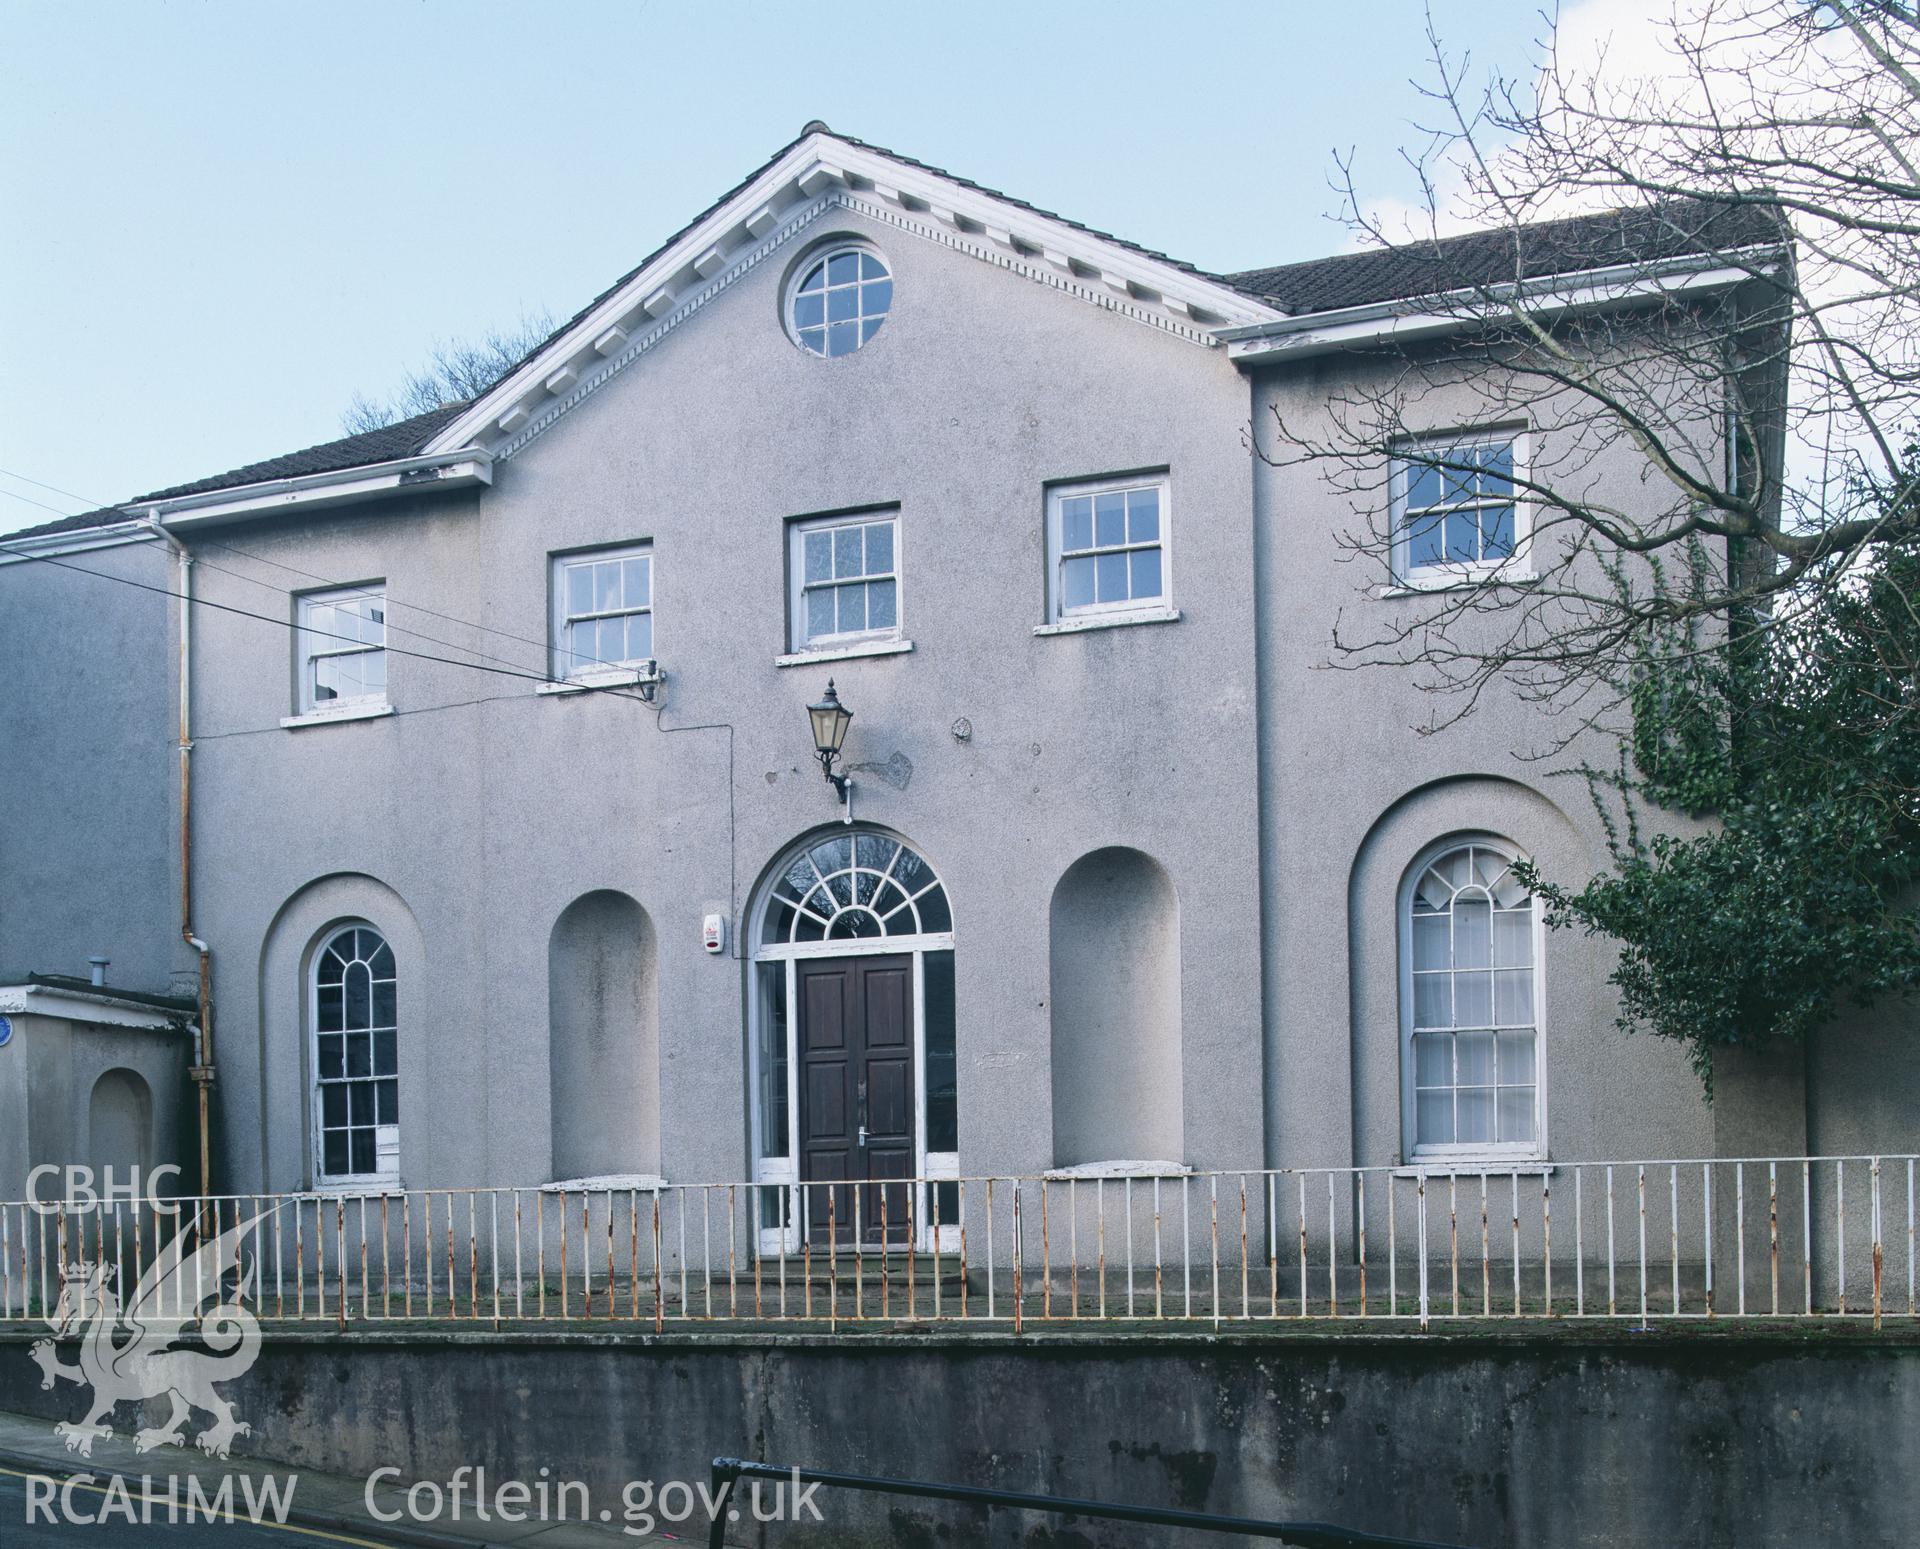 RCAHMW colour transparency showing exterior view of Foley House, Goat Street, Haverfordwest, taken by Iain Wright, 2003